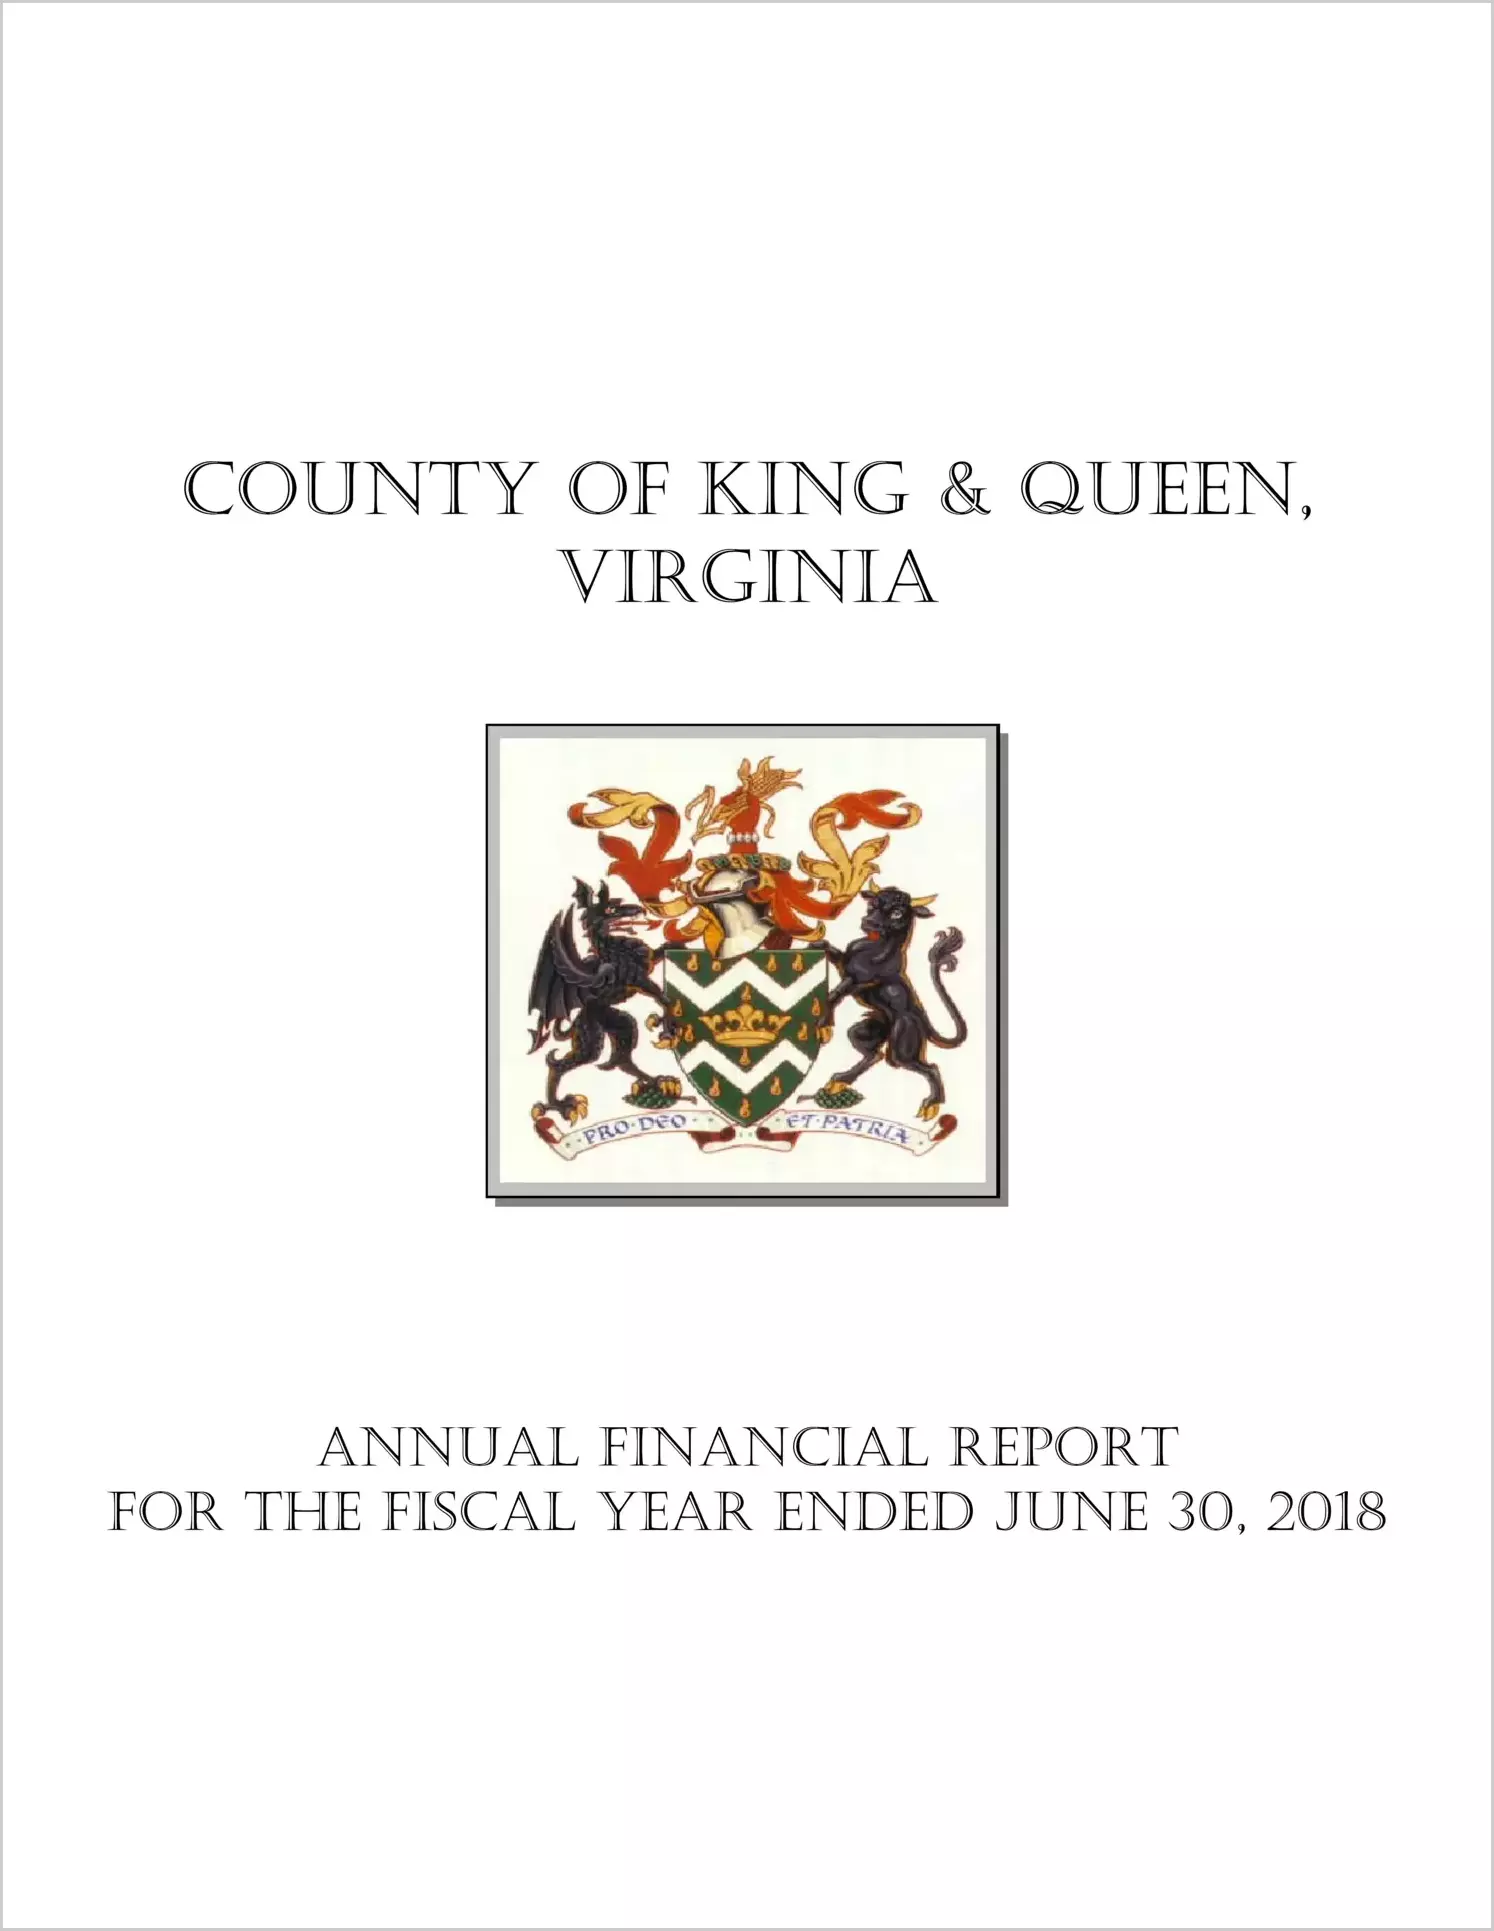 2018 Annual Financial Report for County of King and Queen